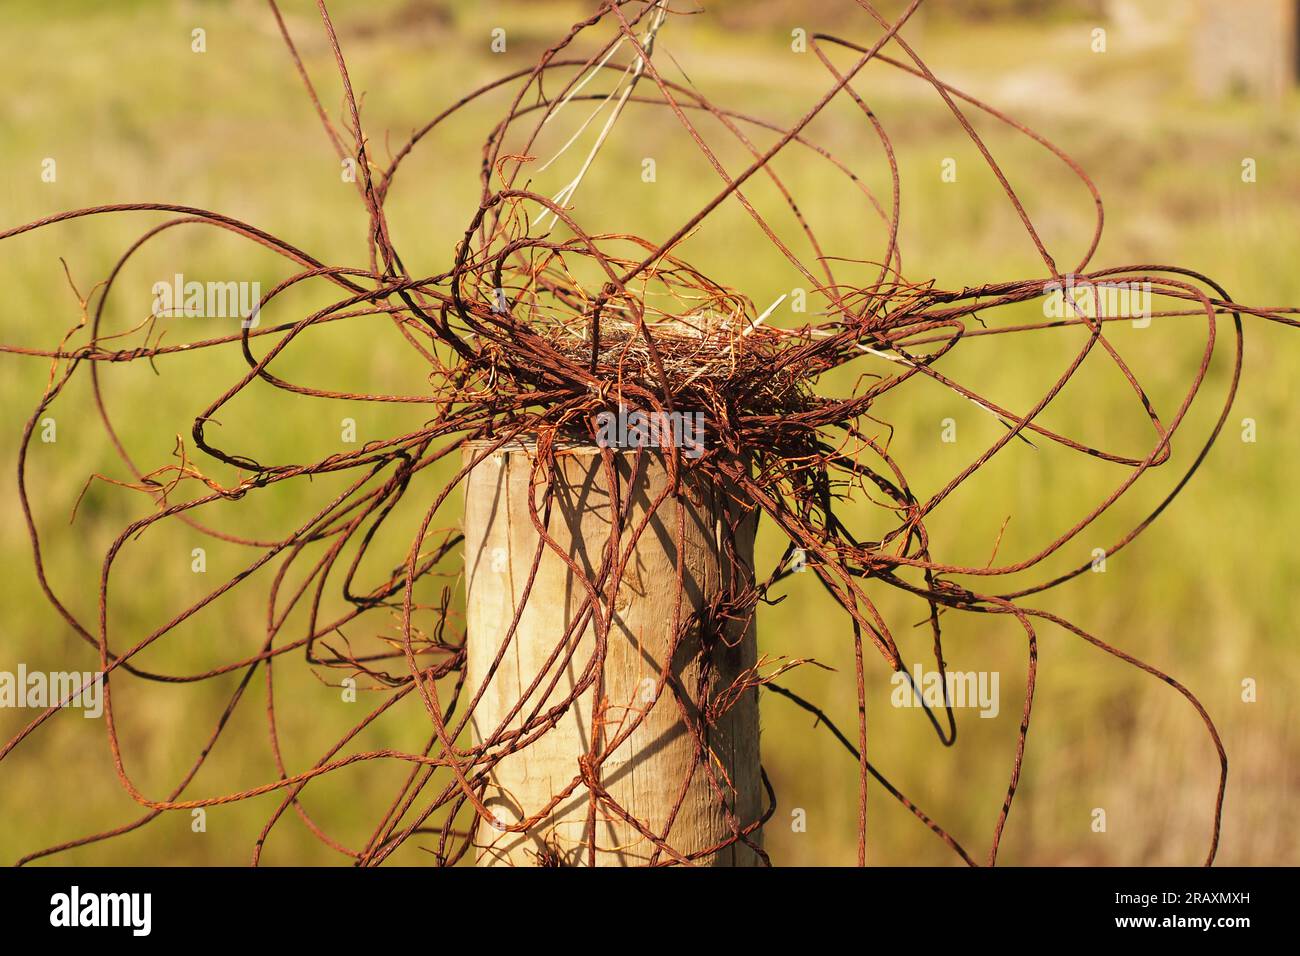 A jumble of unruly, old, rusty, fencing wire attached to a round wooden fence post with a grassy background Stock Photo